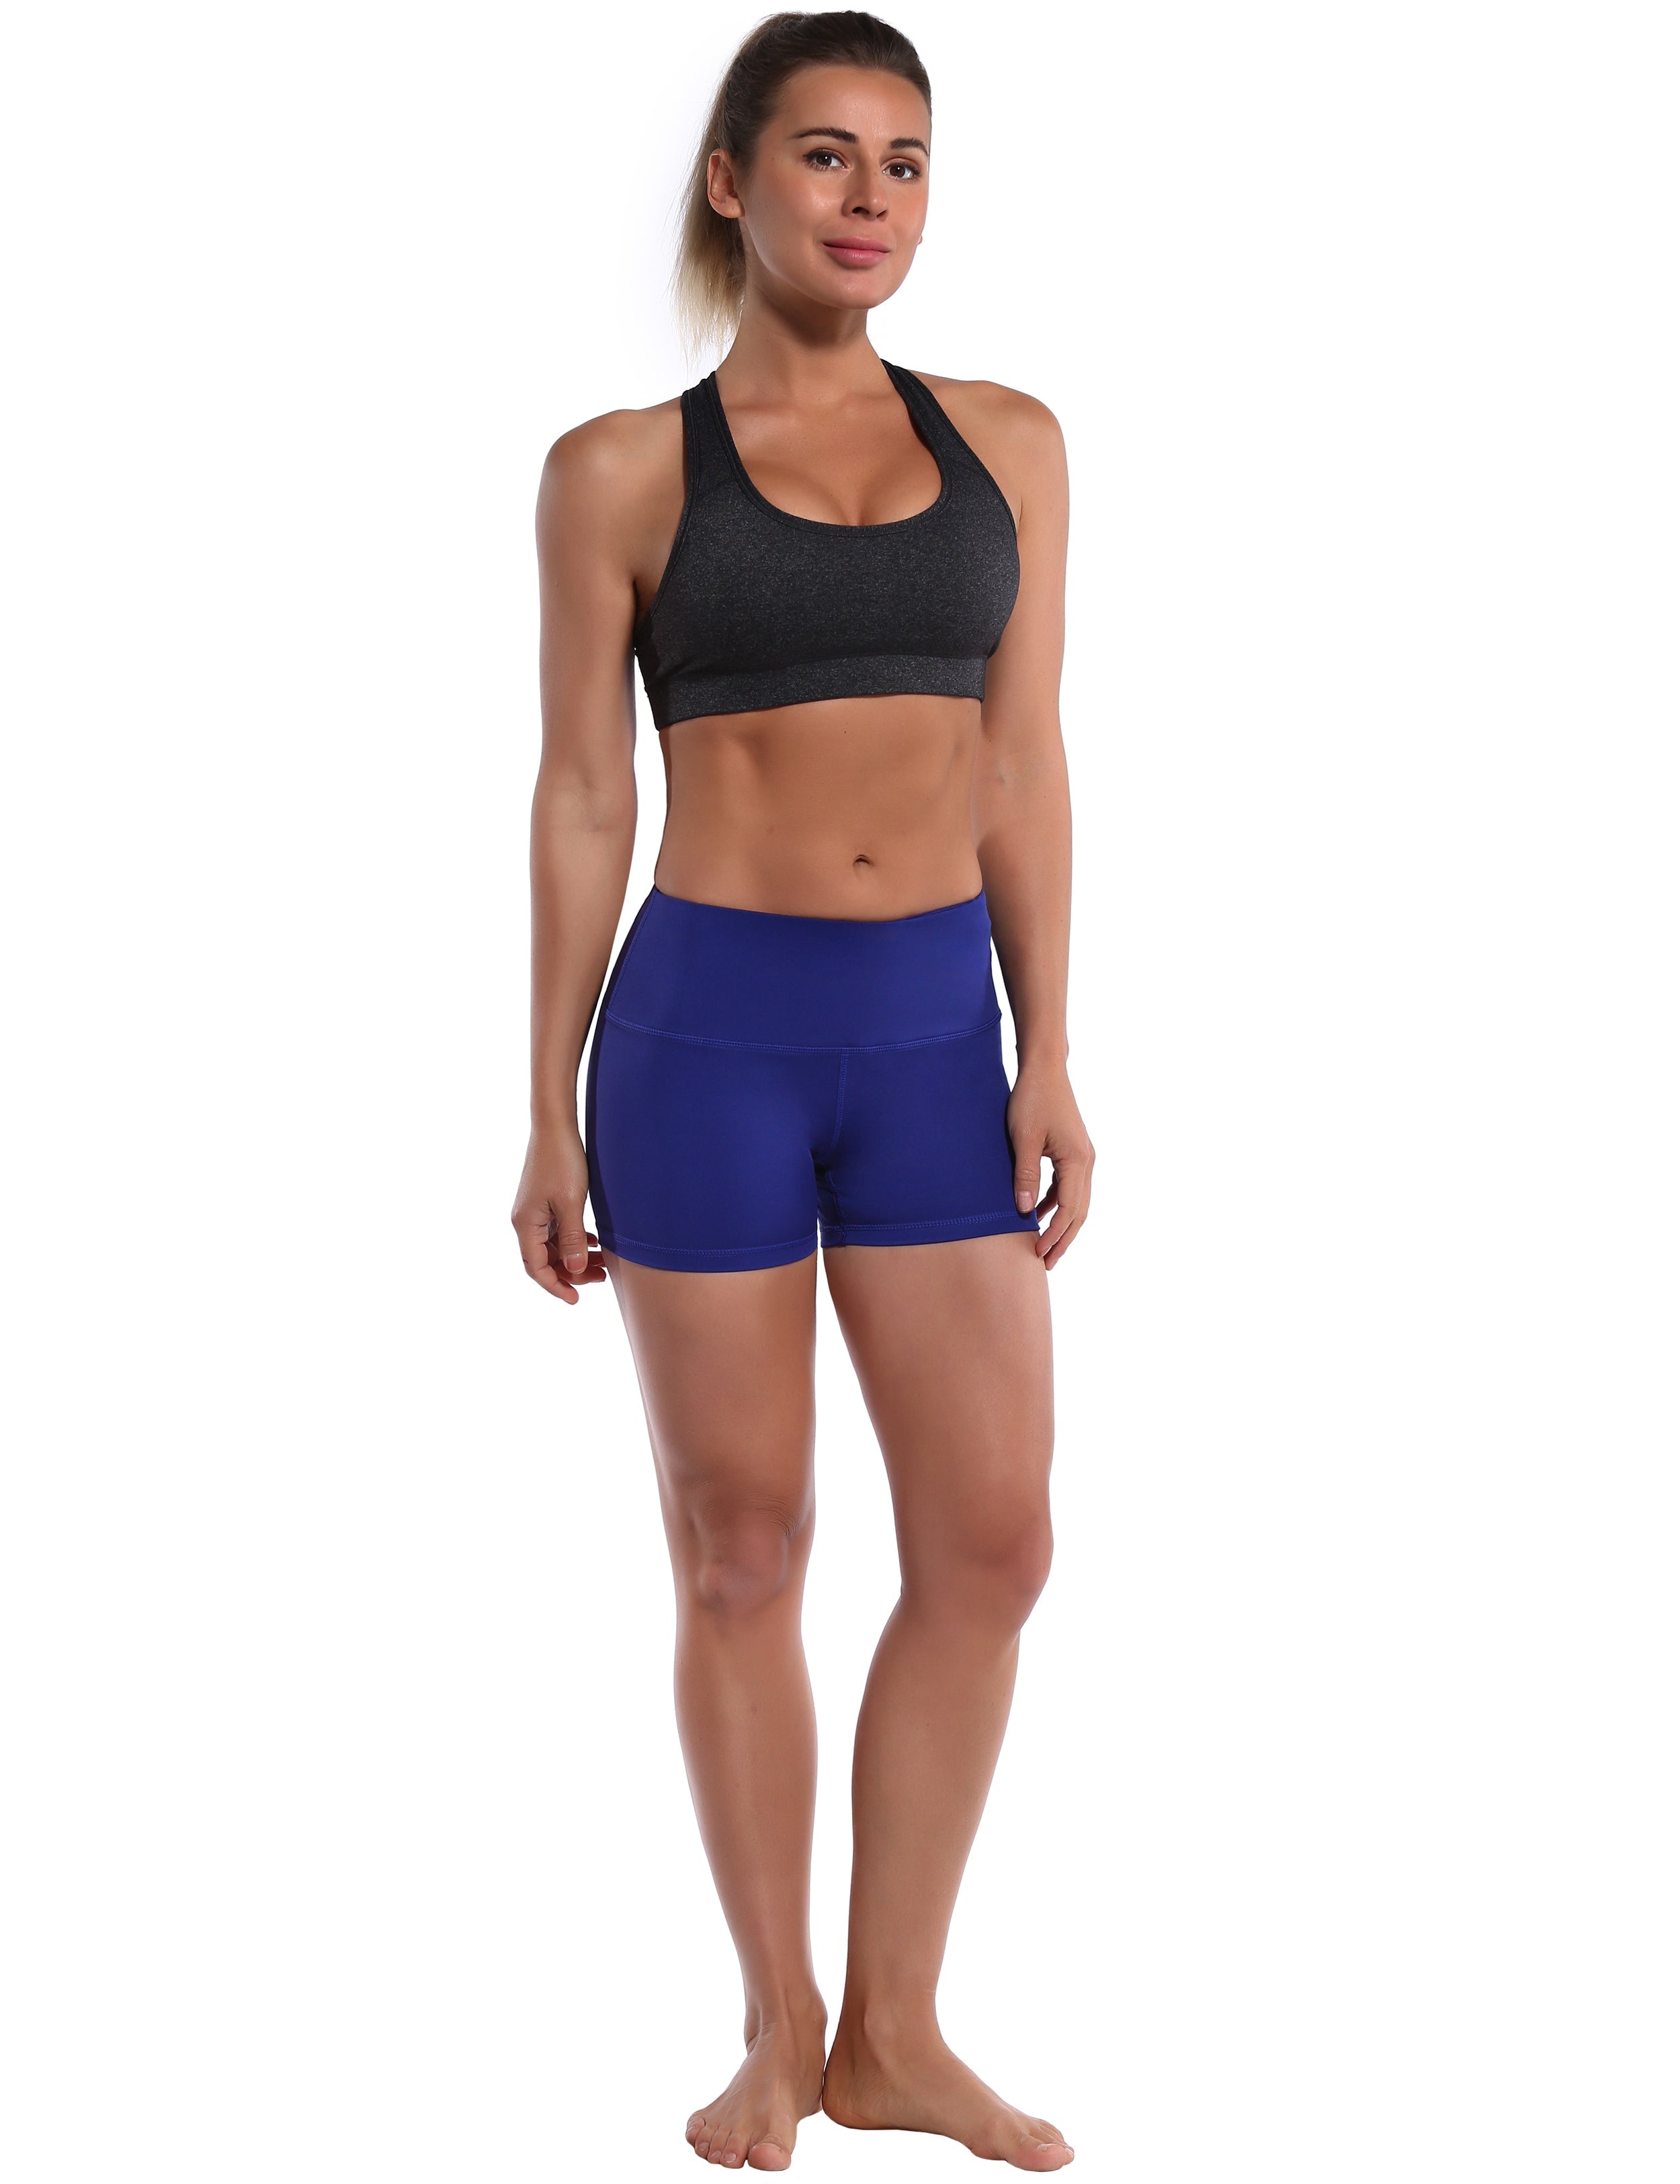 2.5" Jogging Shorts navy Softest-ever fabric High elasticity High density 4-way stretch Fabric doesn't attract lint easily No see-through Moisture-wicking Machine wash 75% Nylon, 25% Spandex